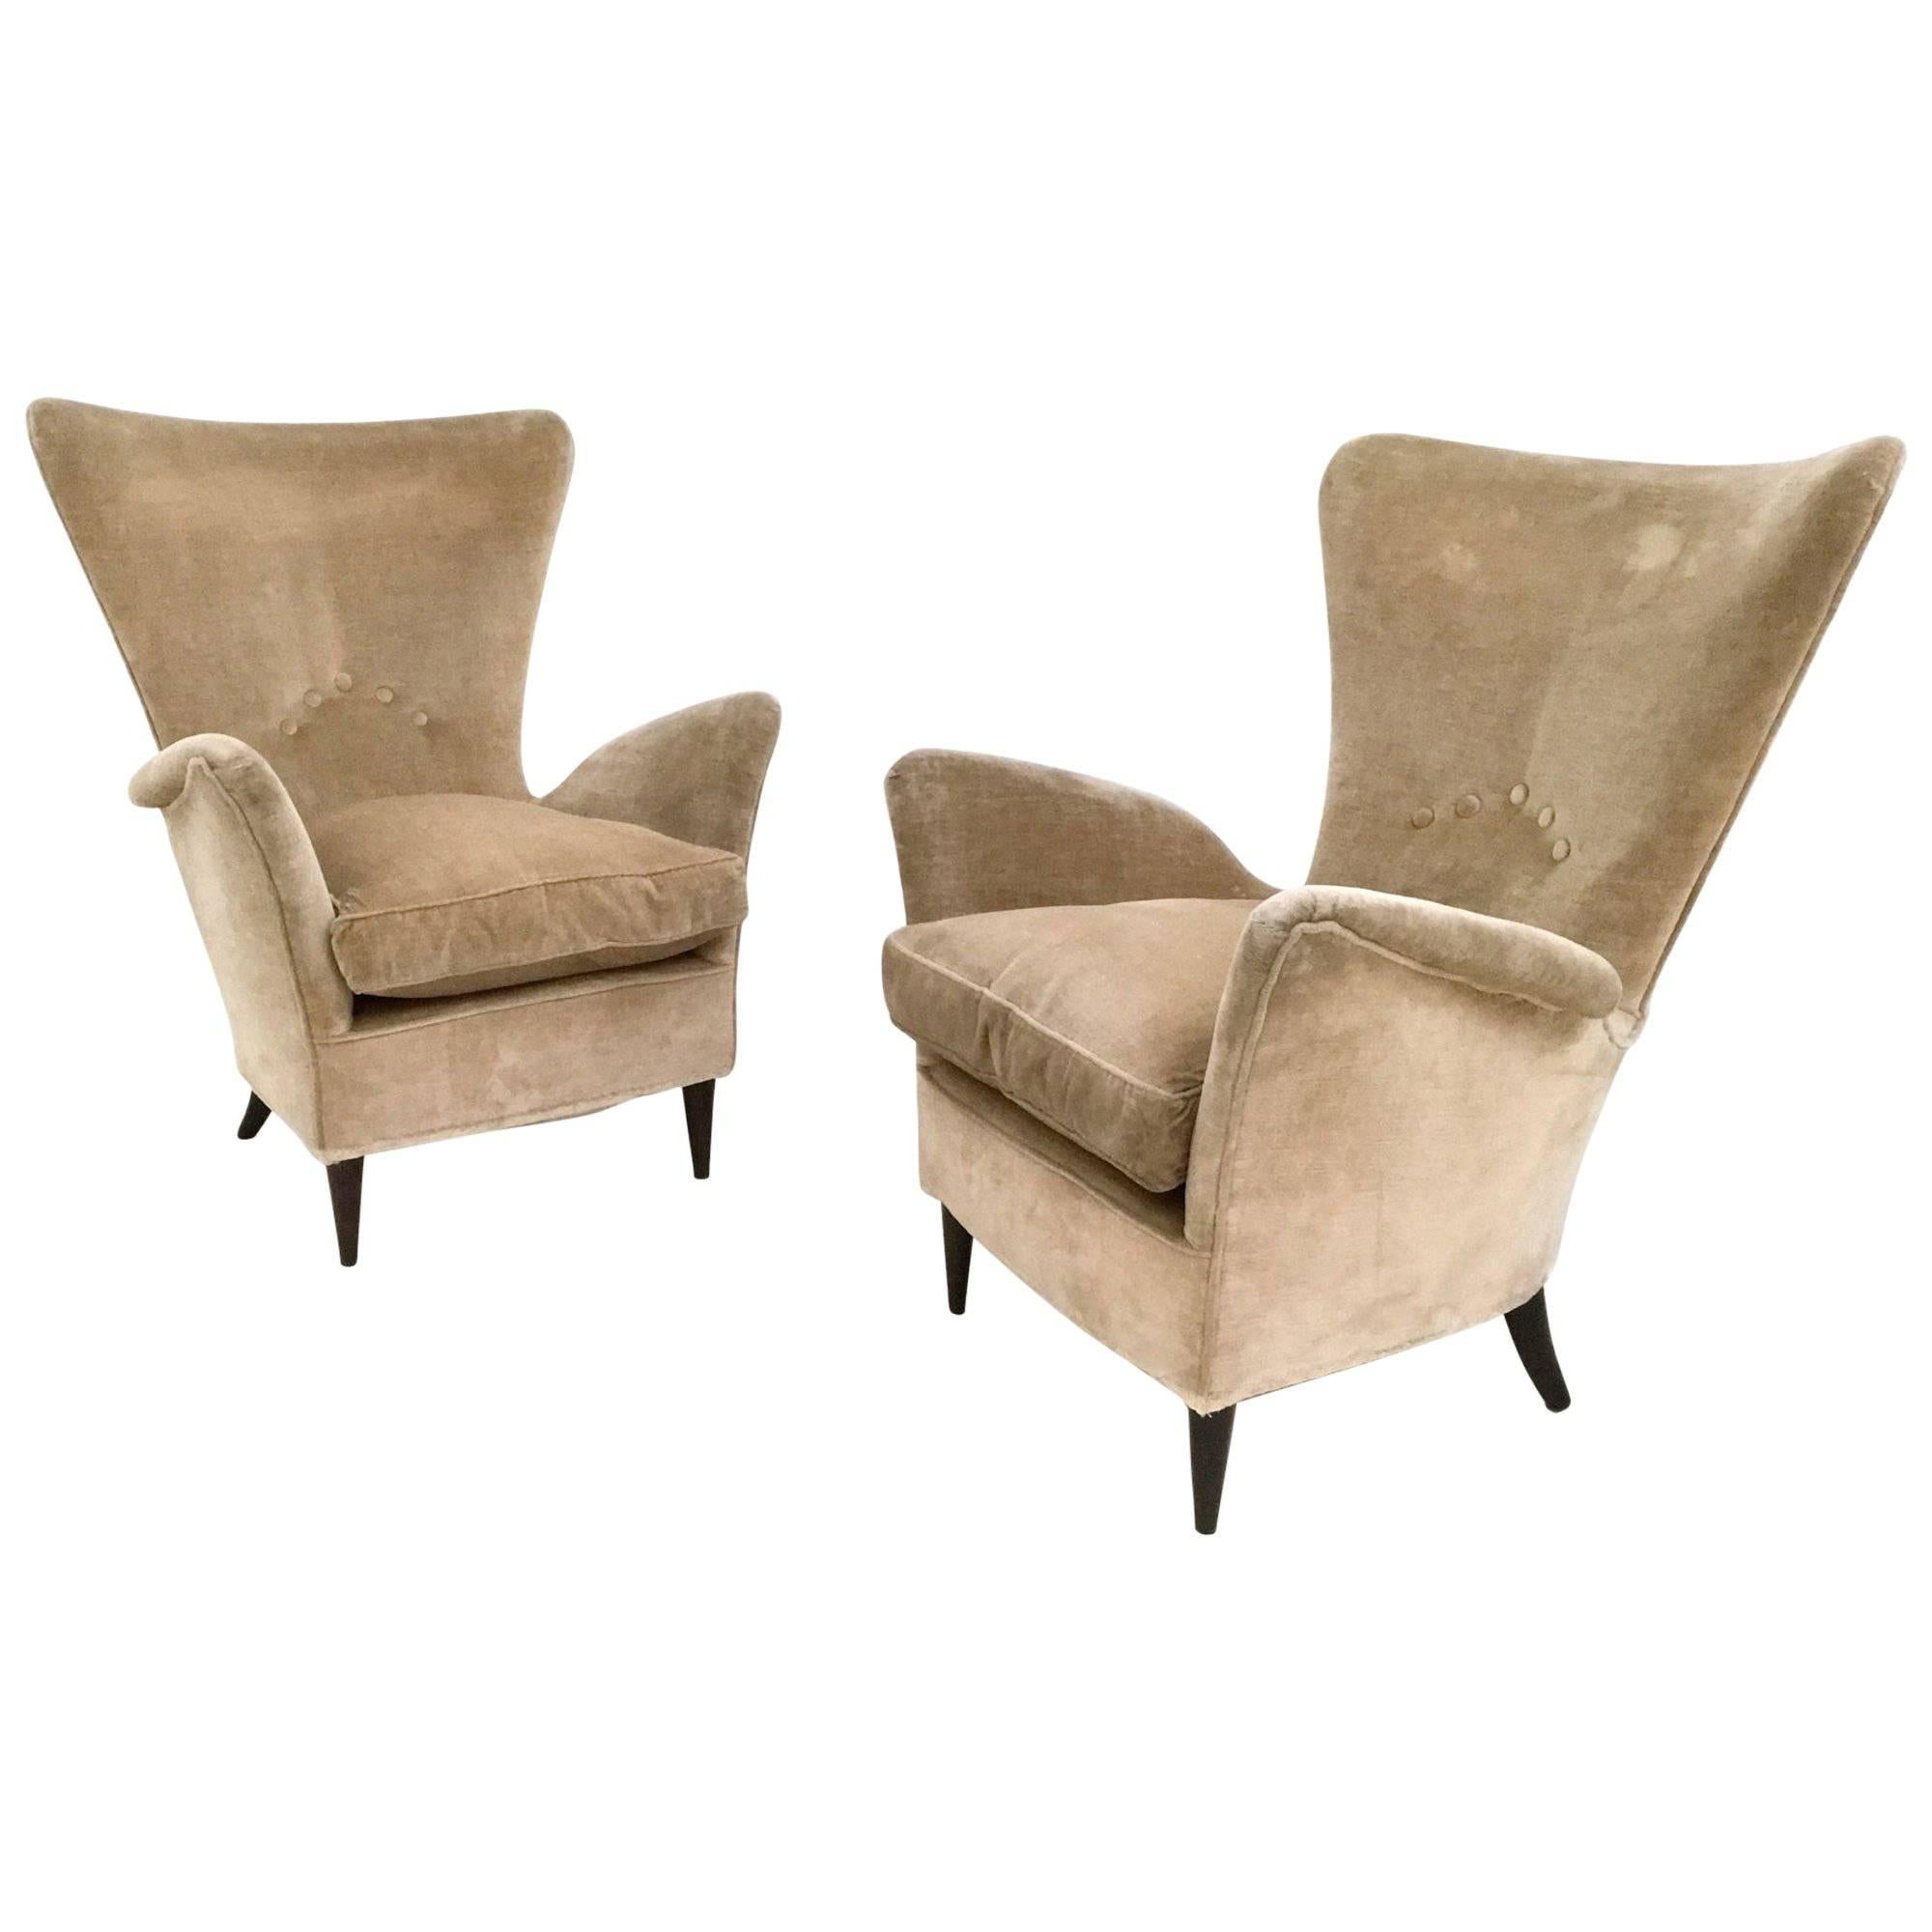 Pair of Beige Velvet Armchairs Ascribable to Gio Ponti for Hotel Bistrol, 1950s